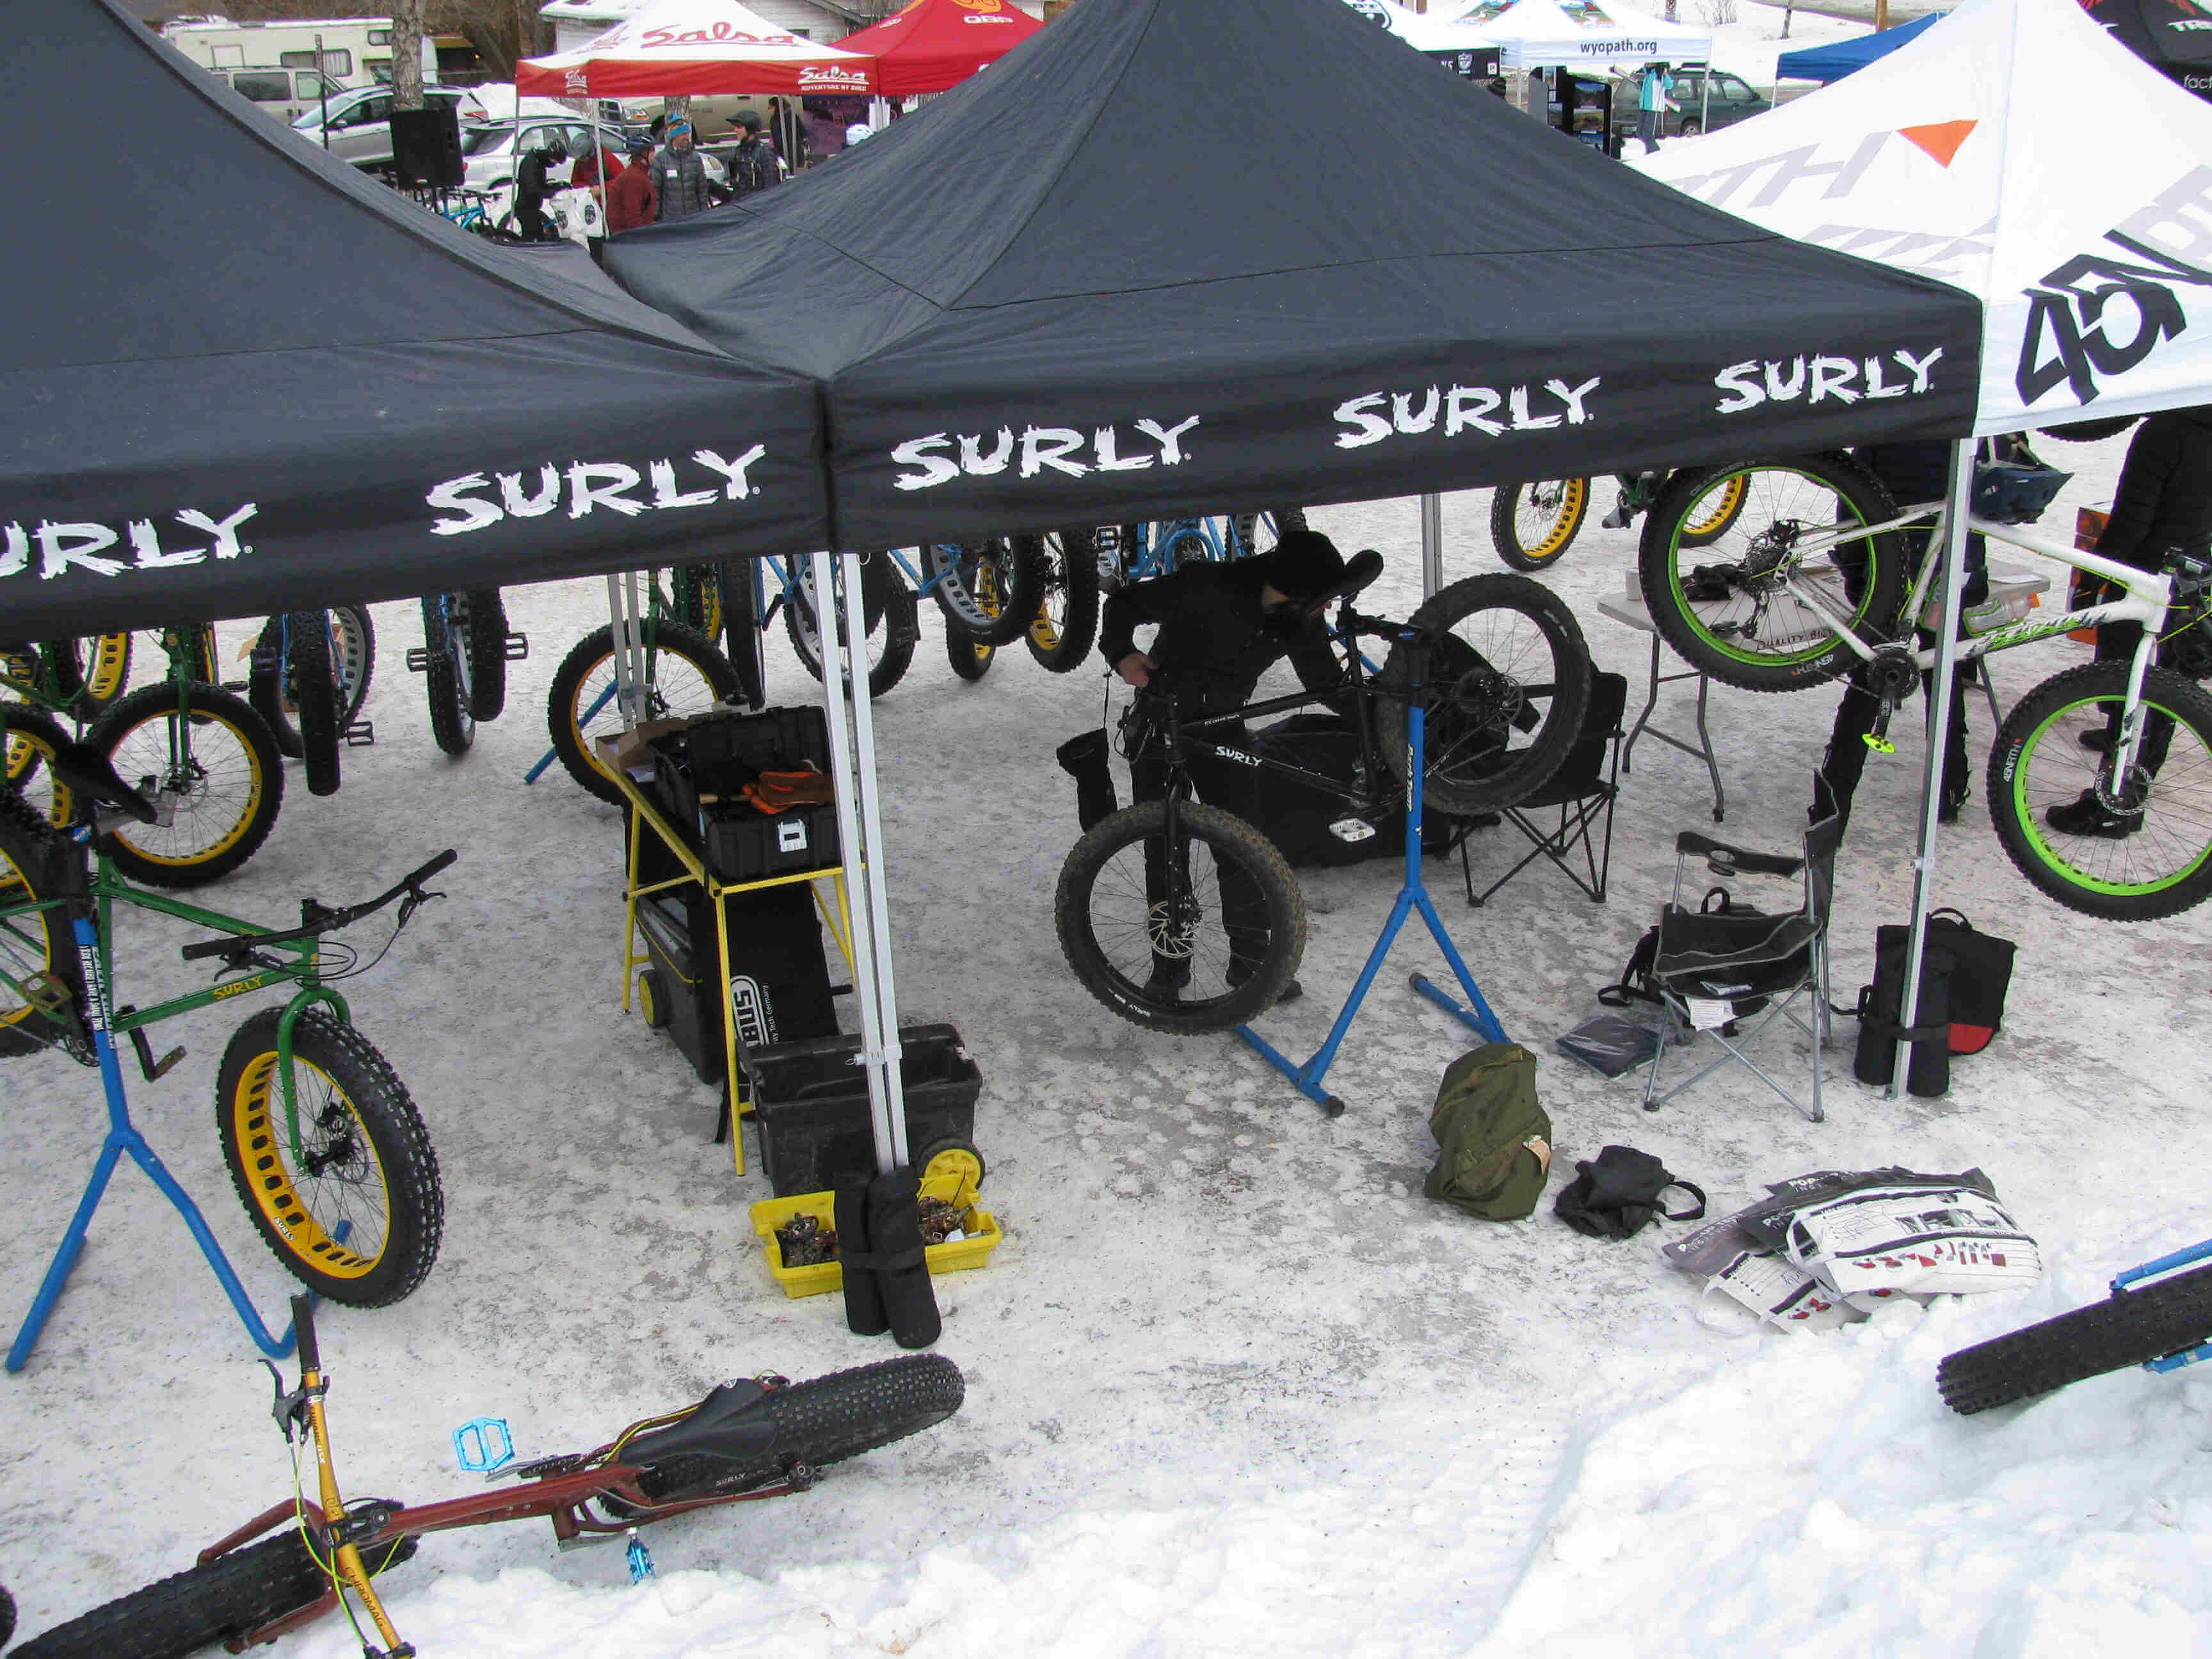 Downward view of a person, under a Surly Bikes canopy on snow, fixing a fat bike on a repair stand